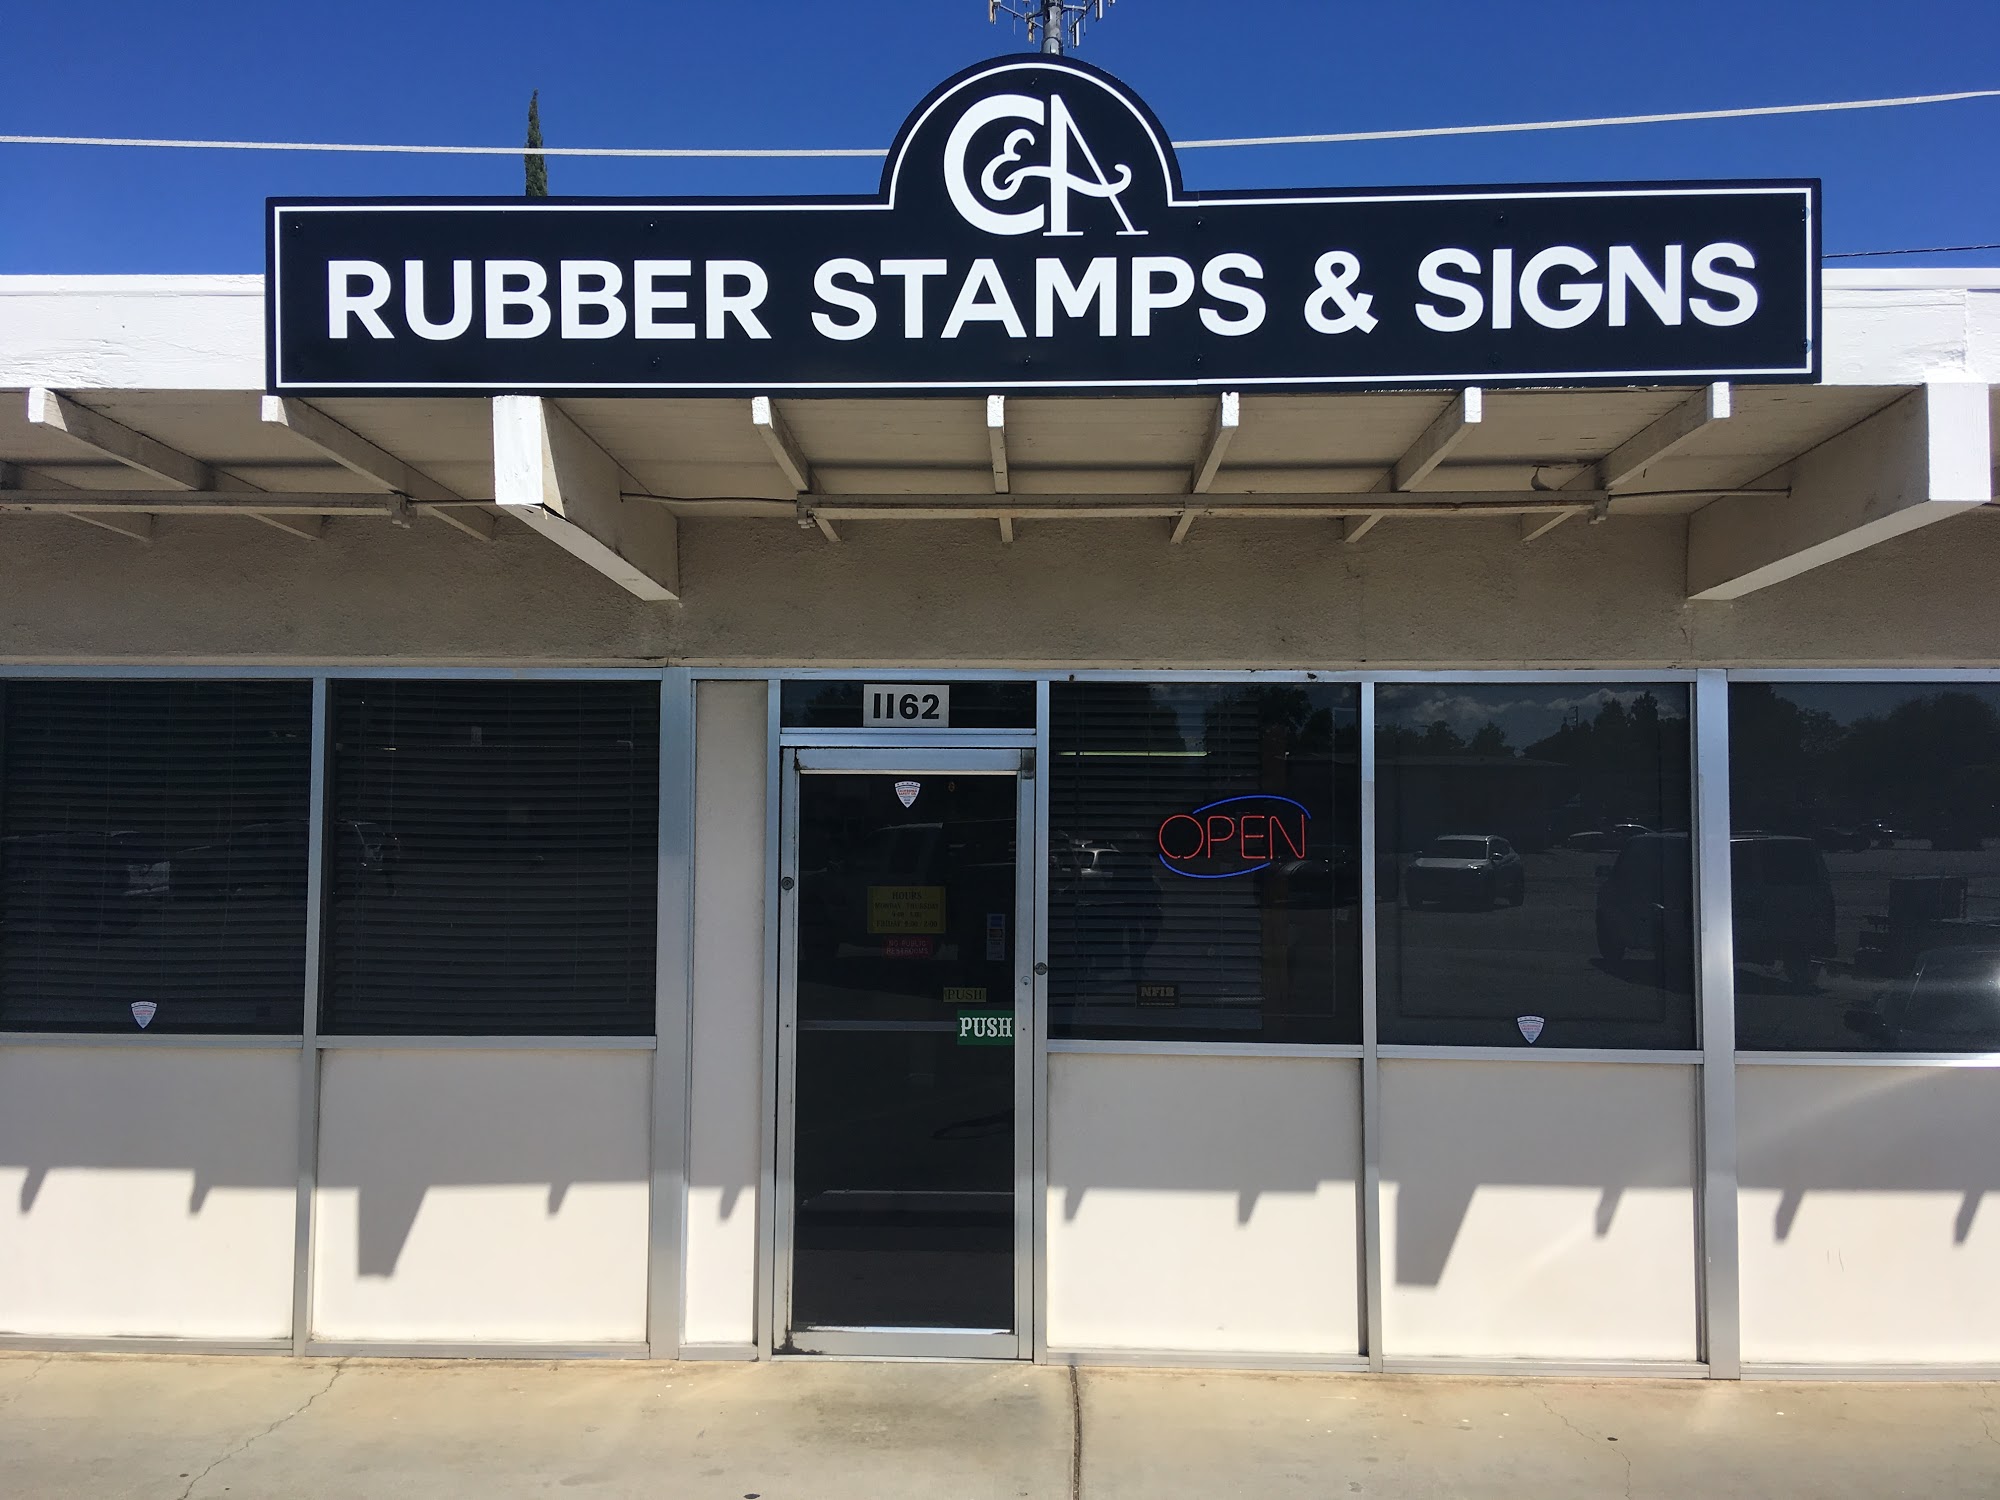 C&A Rubber Stamps & Signs